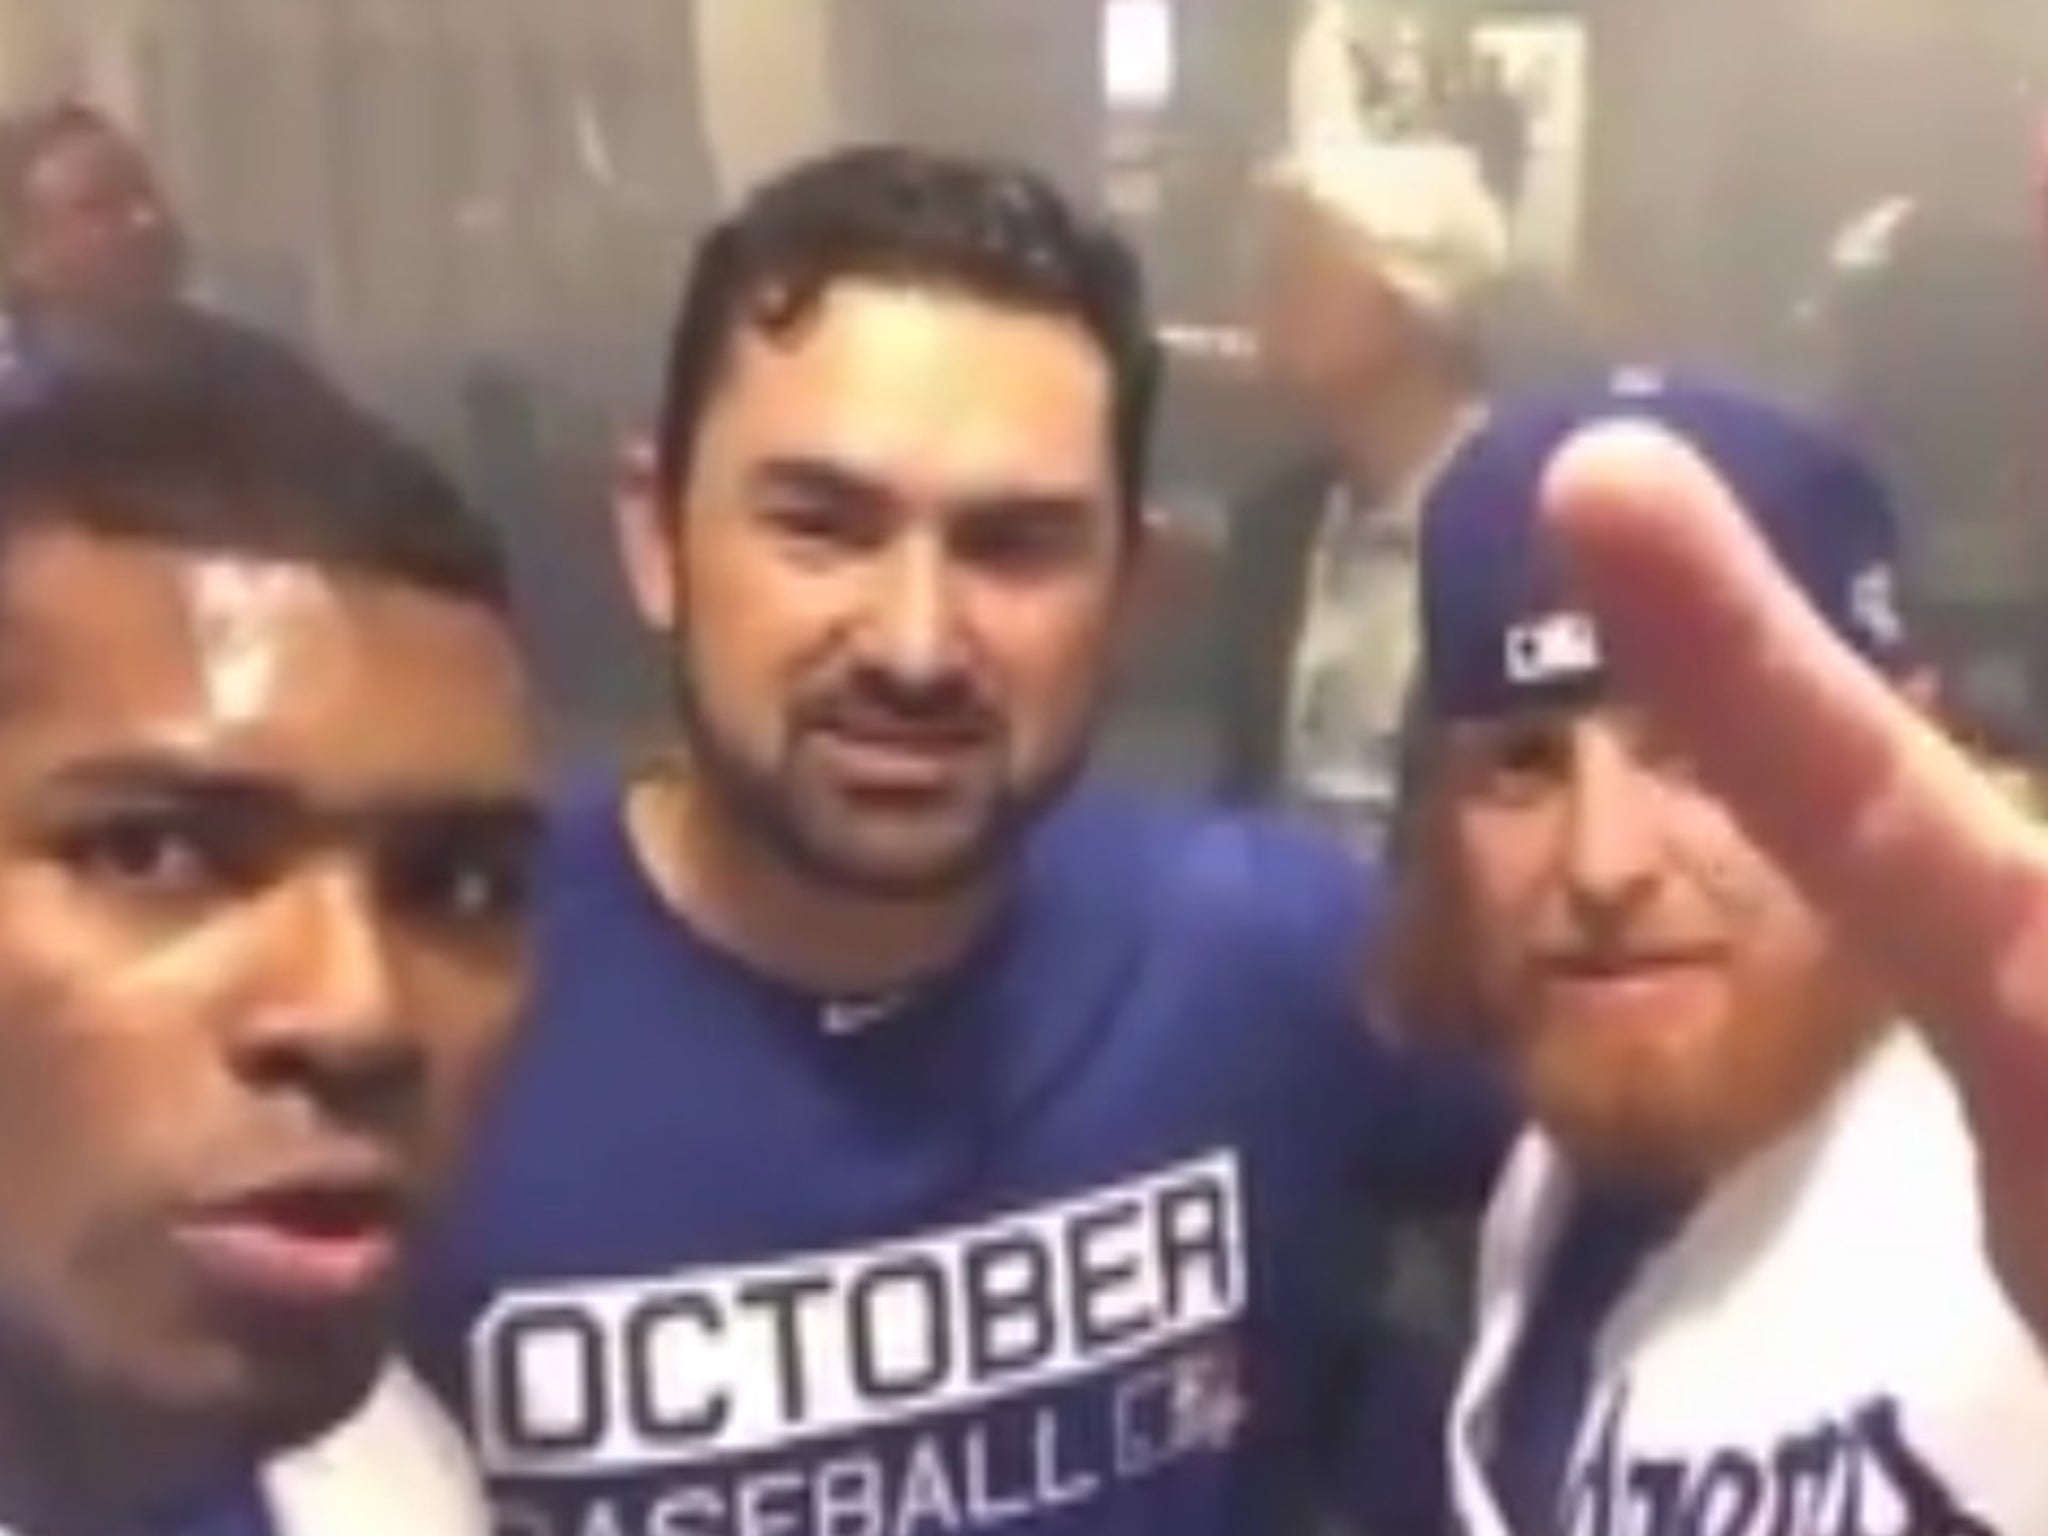 Yasiel Puig has a new hair style and it's kind of weird